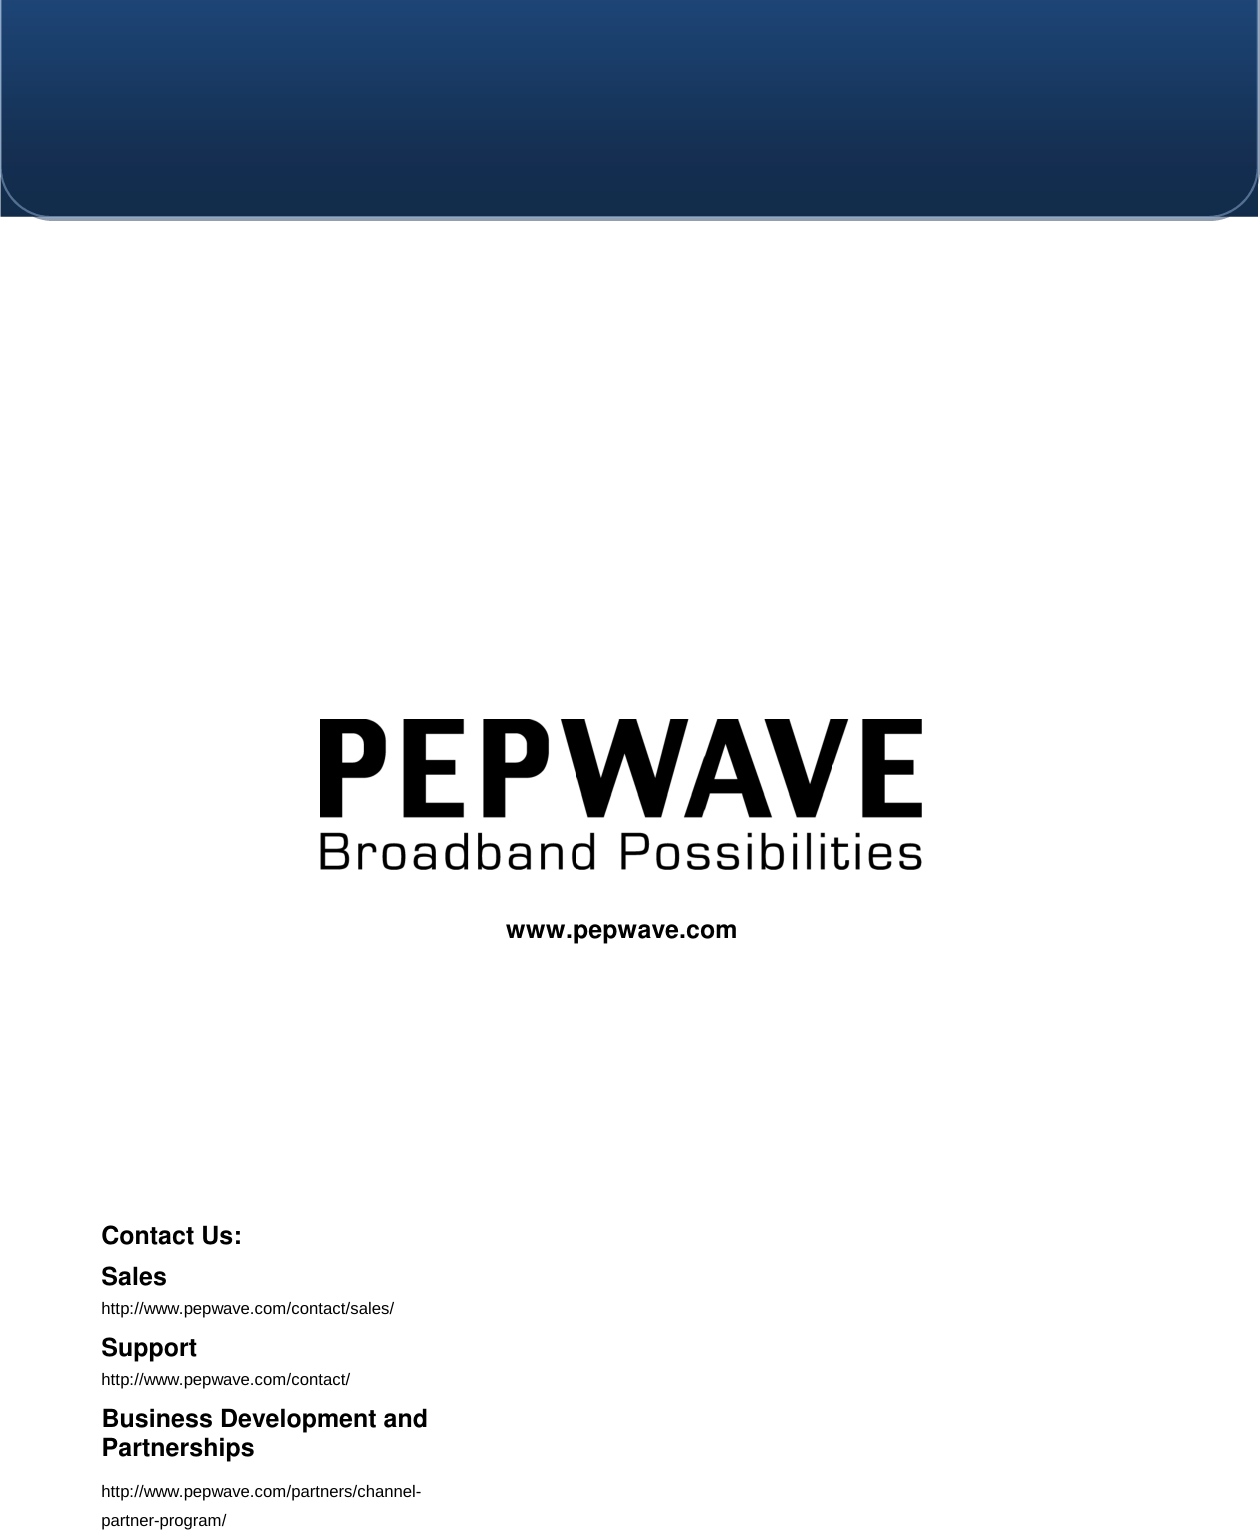    Contact Us:   Sales http://www.pepwave.com/contact/sales/ Support http://www.pepwave.com/contact/ Business Development and Partnerships http://www.pepwave.com/partners/channel-partner-program/ www.pepwave.com  